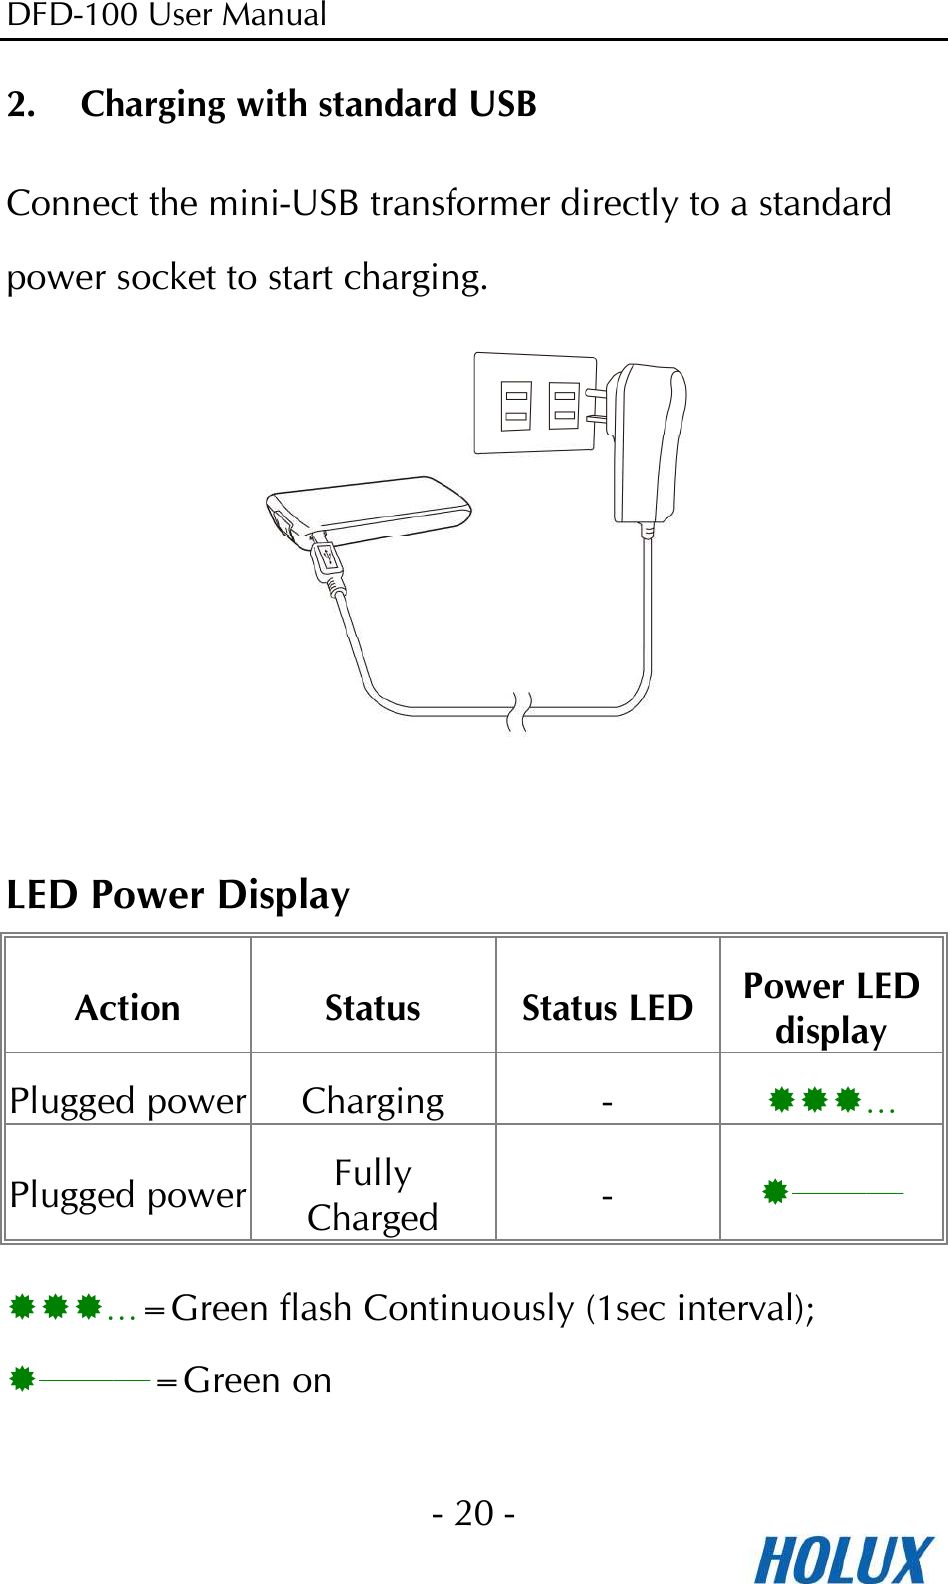 DFD-100 User Manual - 20 -  2. Charging with standard USB Connect the mini-USB transformer directly to a standard power socket to start charging.   LED Power Display Action  Status  Status LED Power LED display Plugged power Charging  -  … Plugged power Fully Charged  -  ─── …=Green flash Continuously (1sec interval);   ───=Green on 